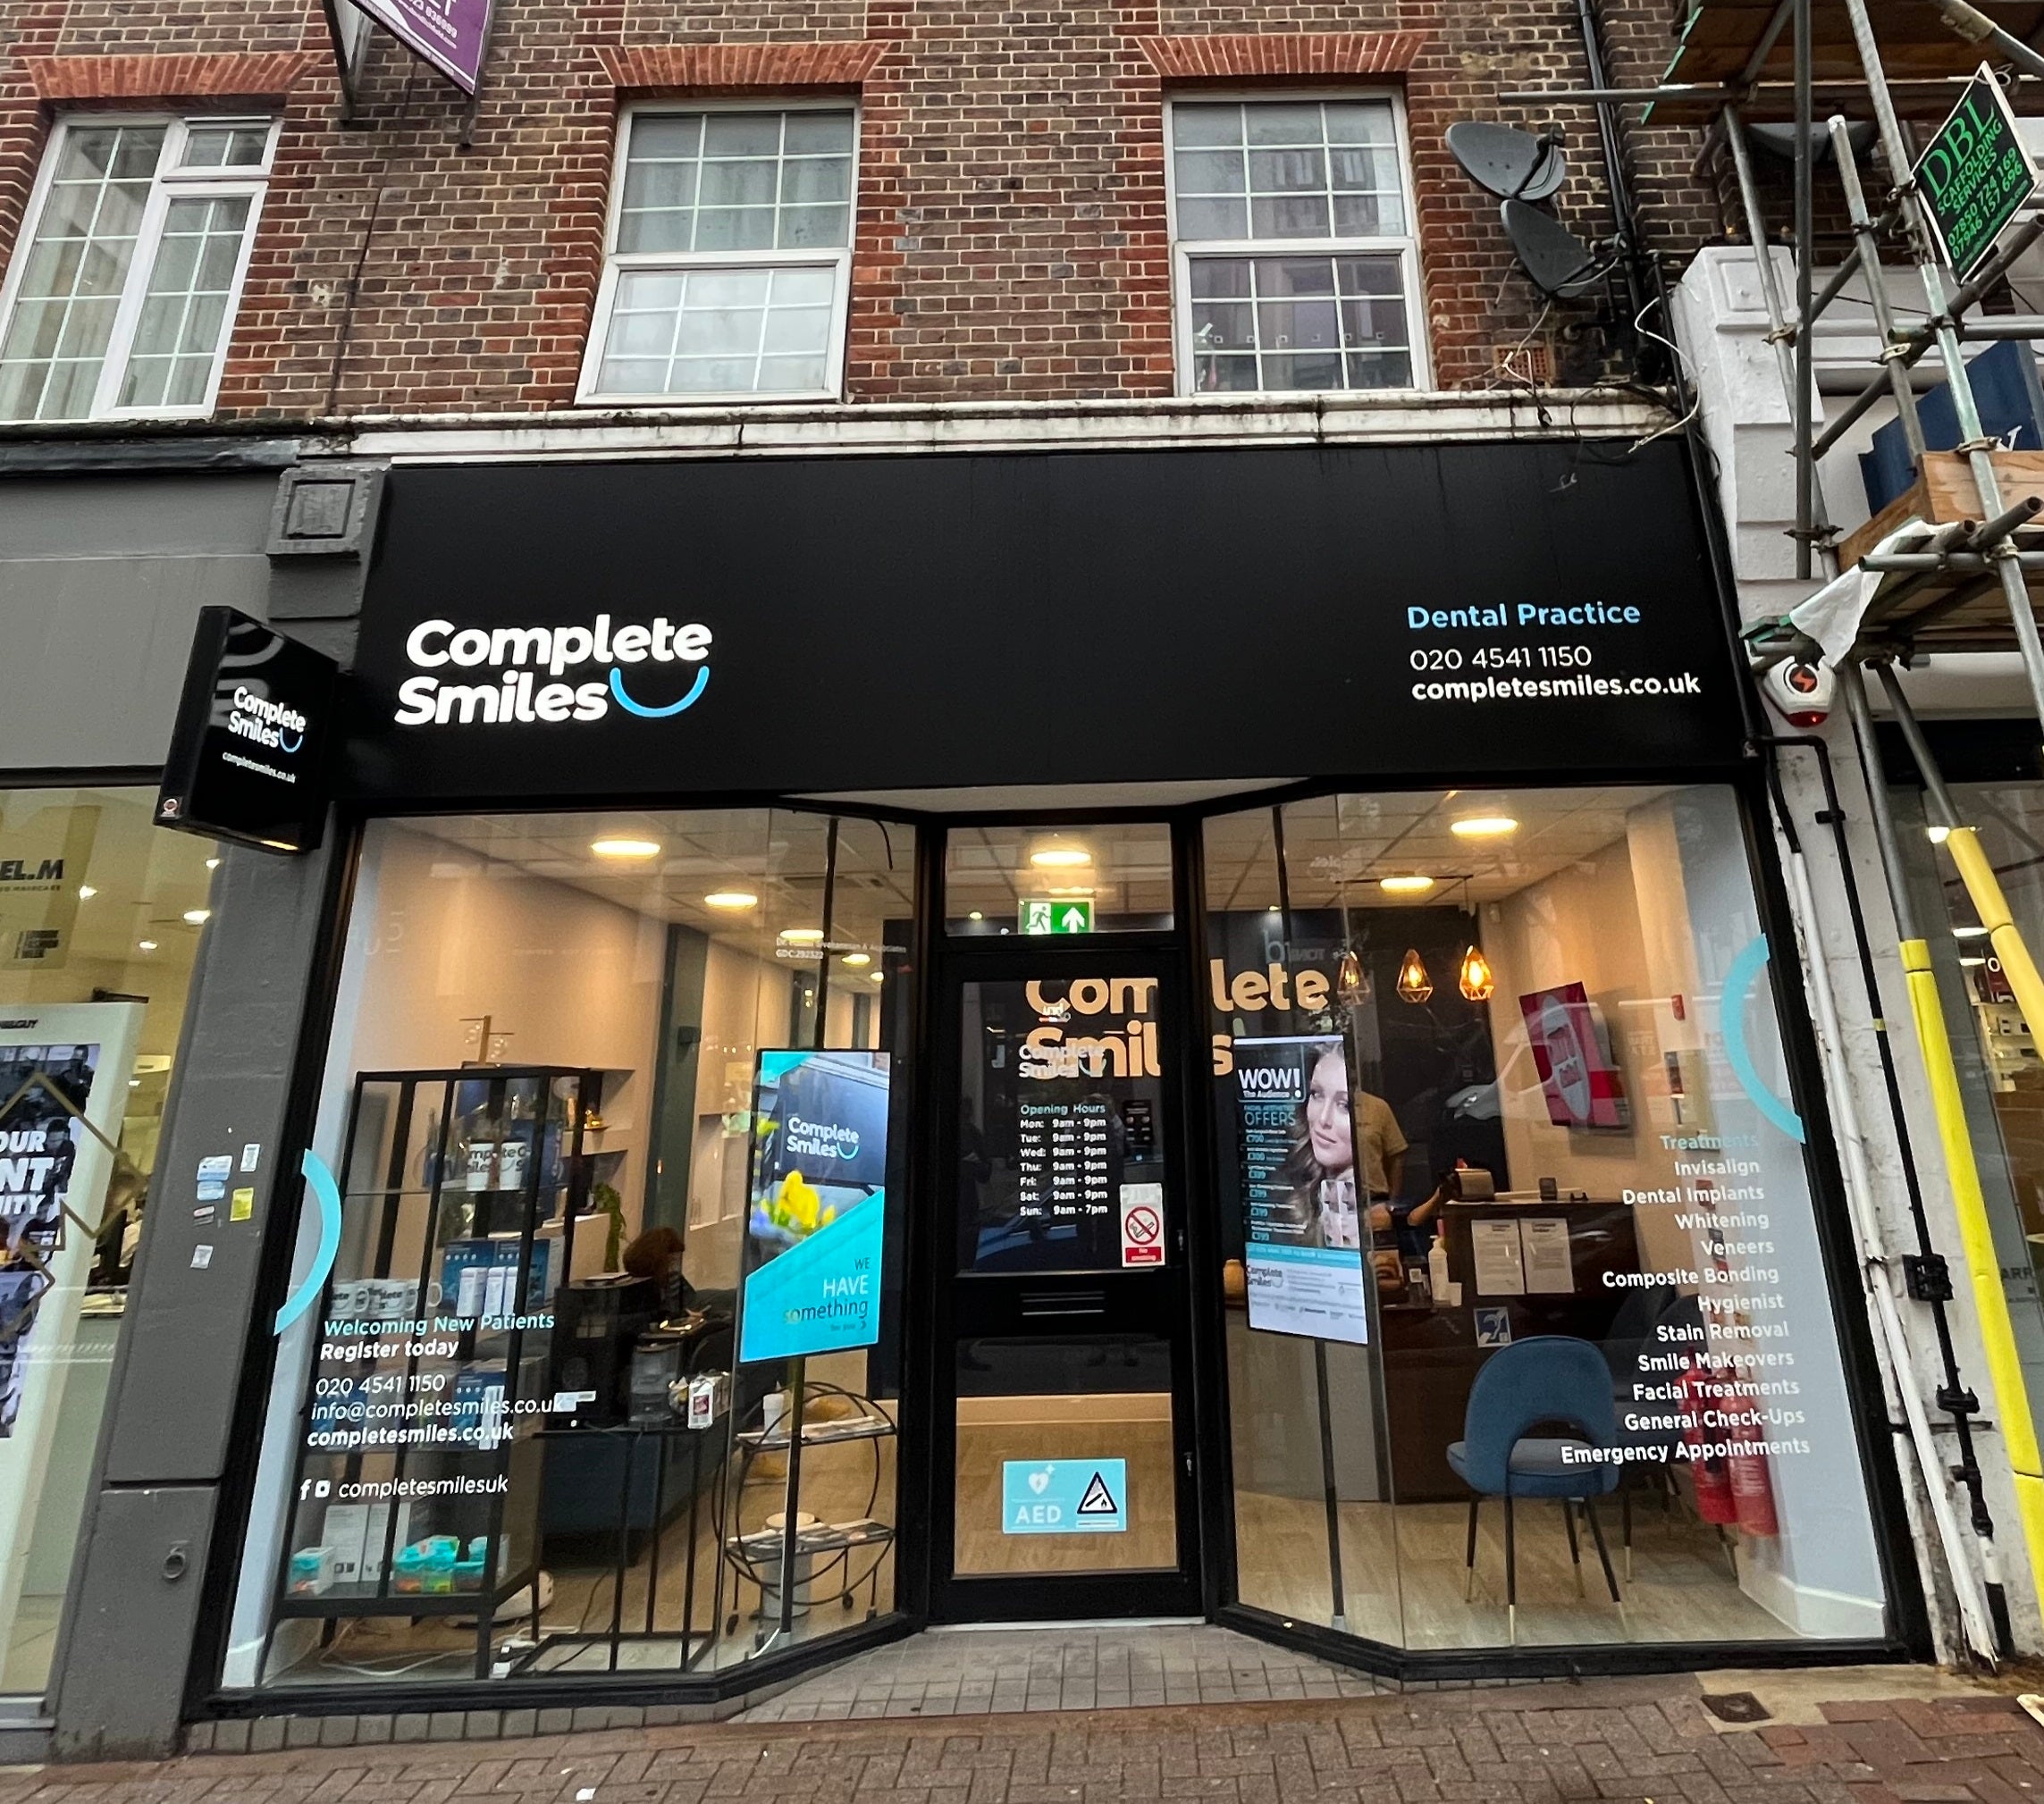 The first Complete Smiles dental practice, in Harrow